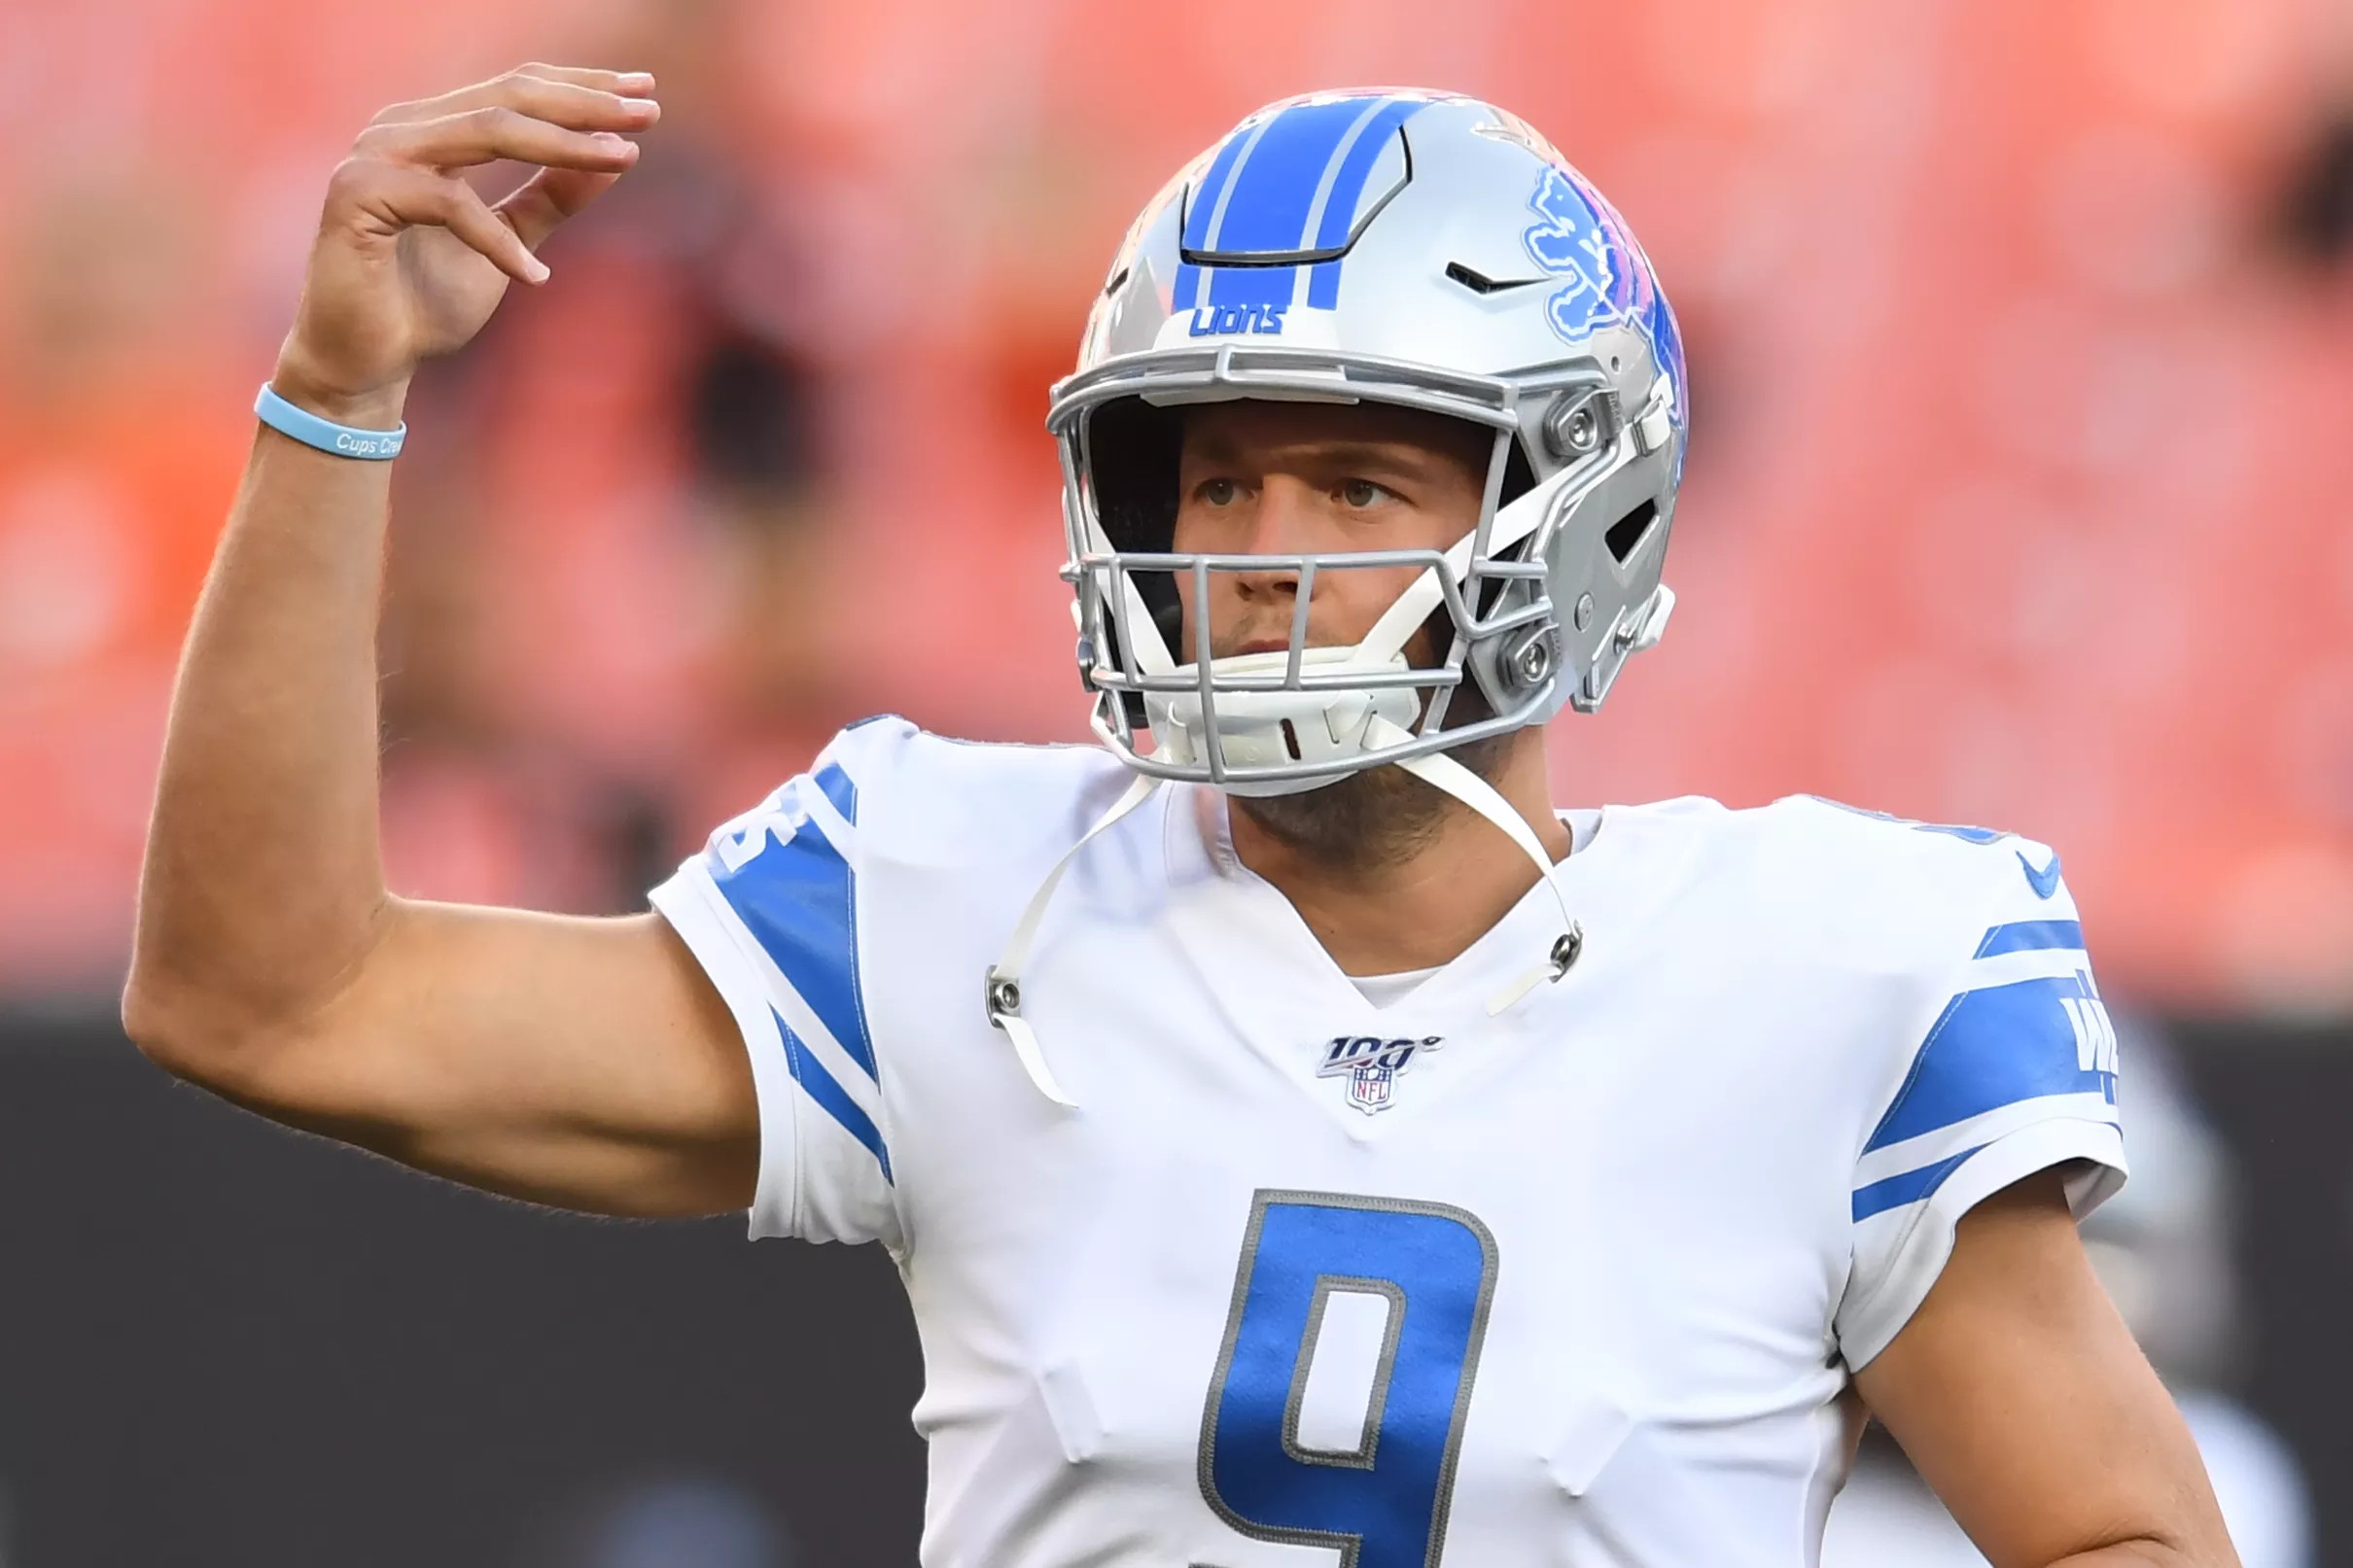 Lions final roster review, season preview, division picks and MORE!